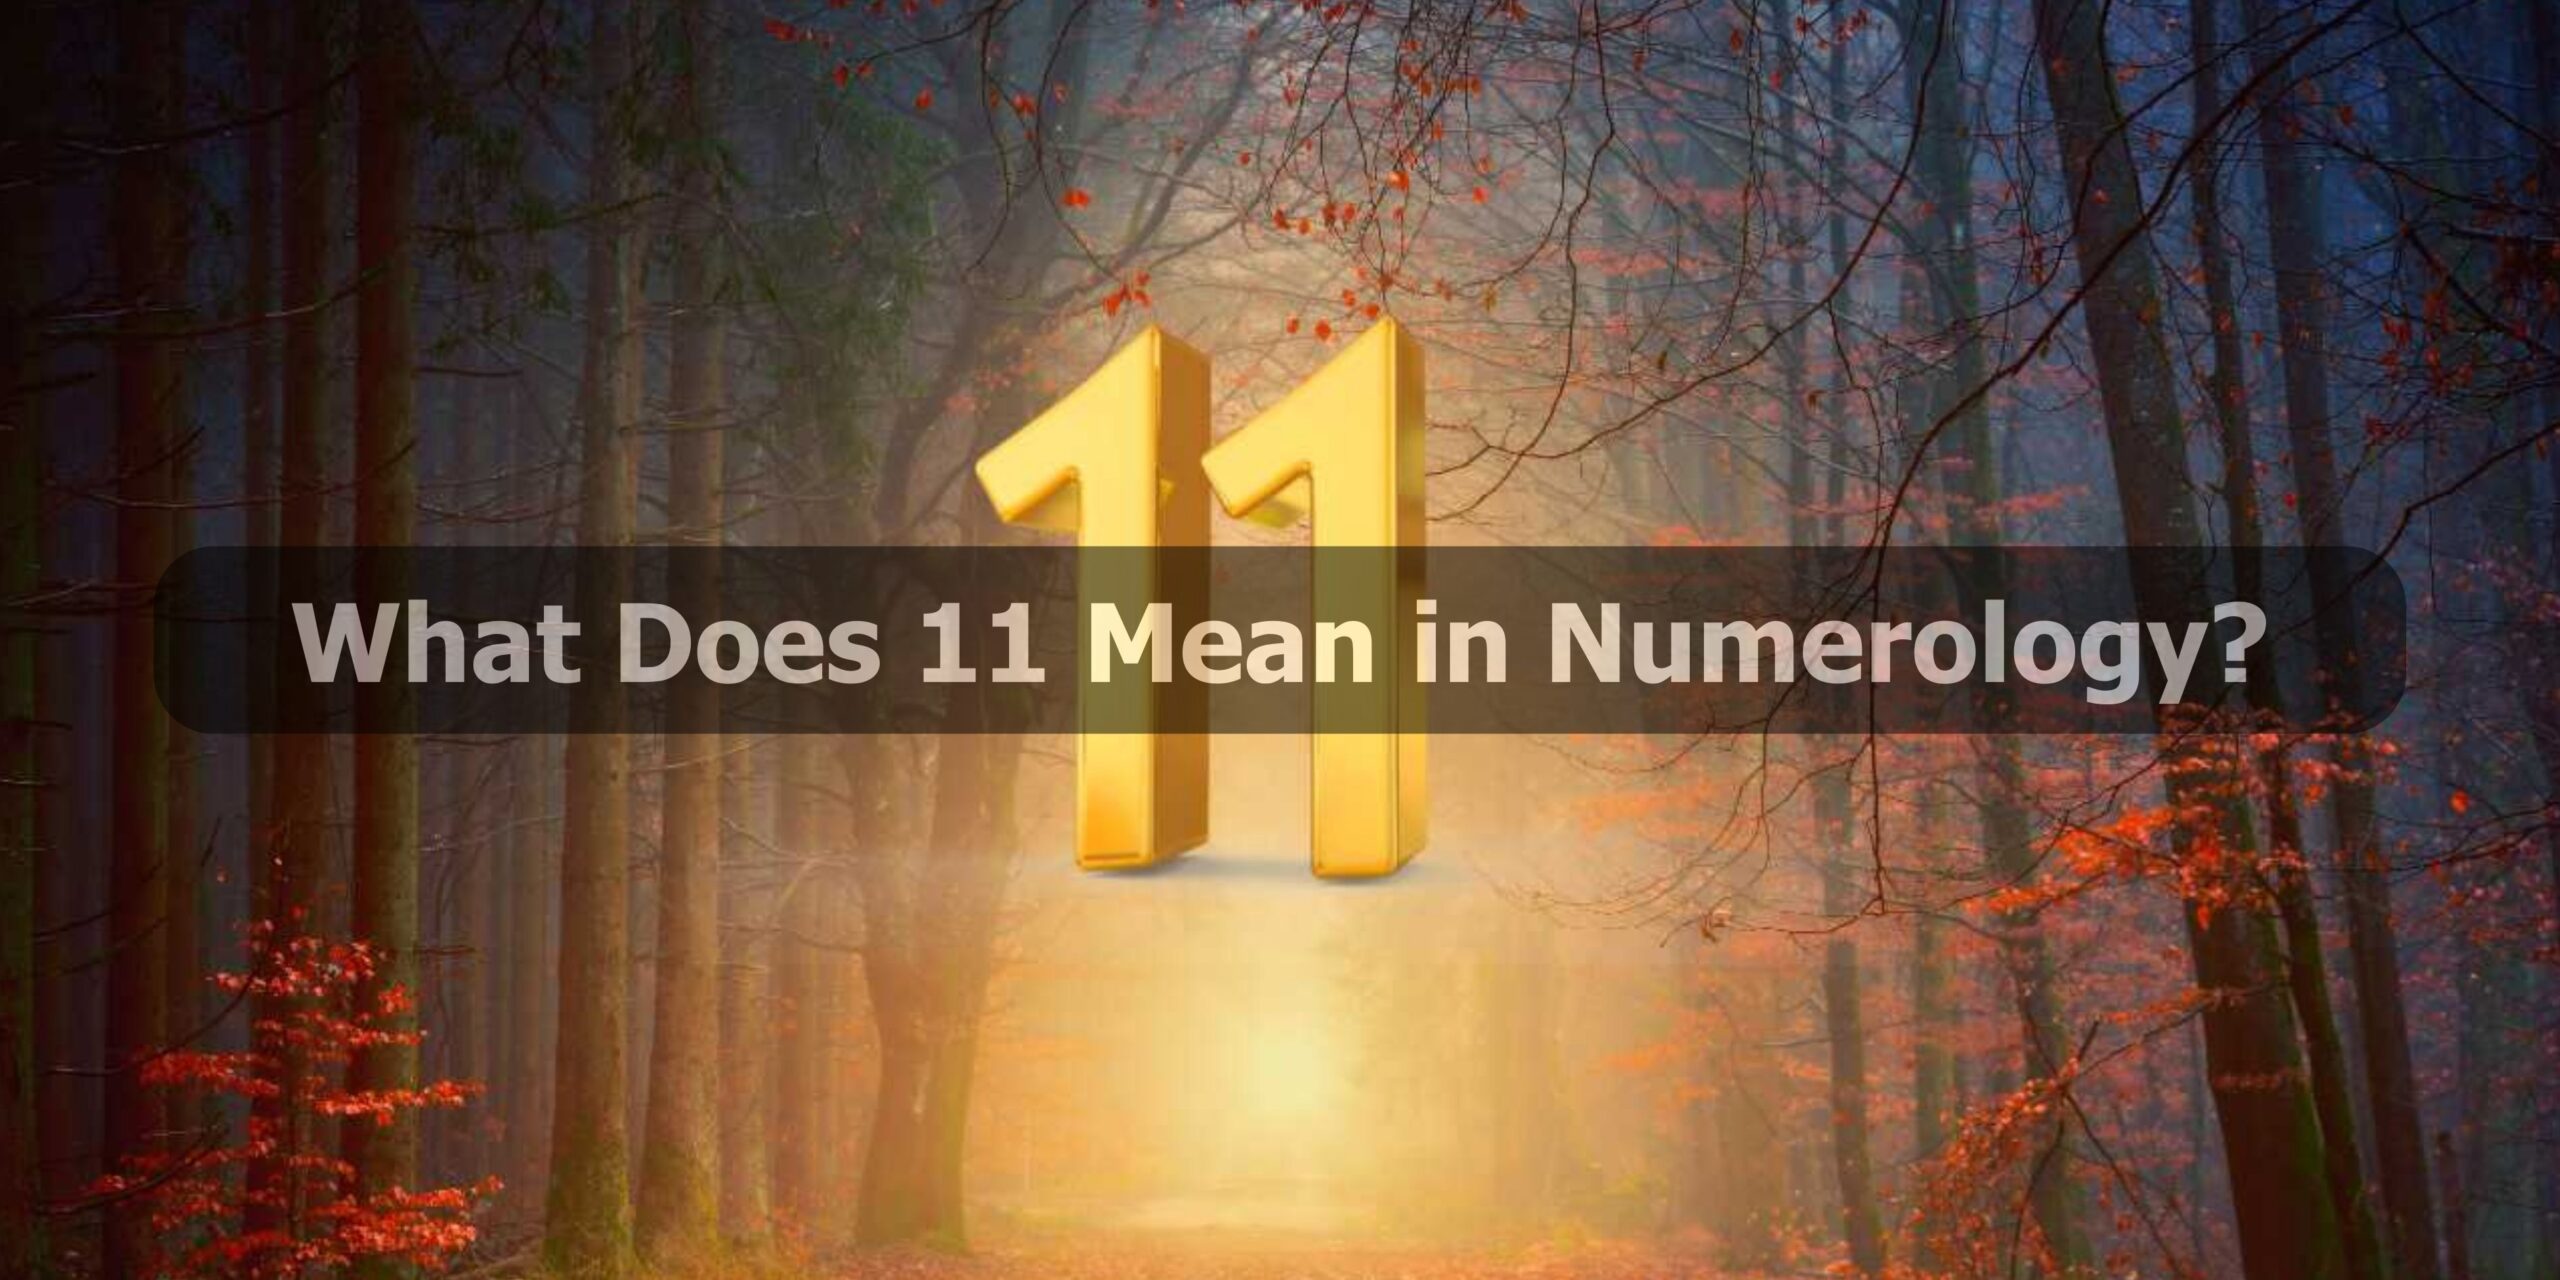 What Does 11 Mean in Numerology